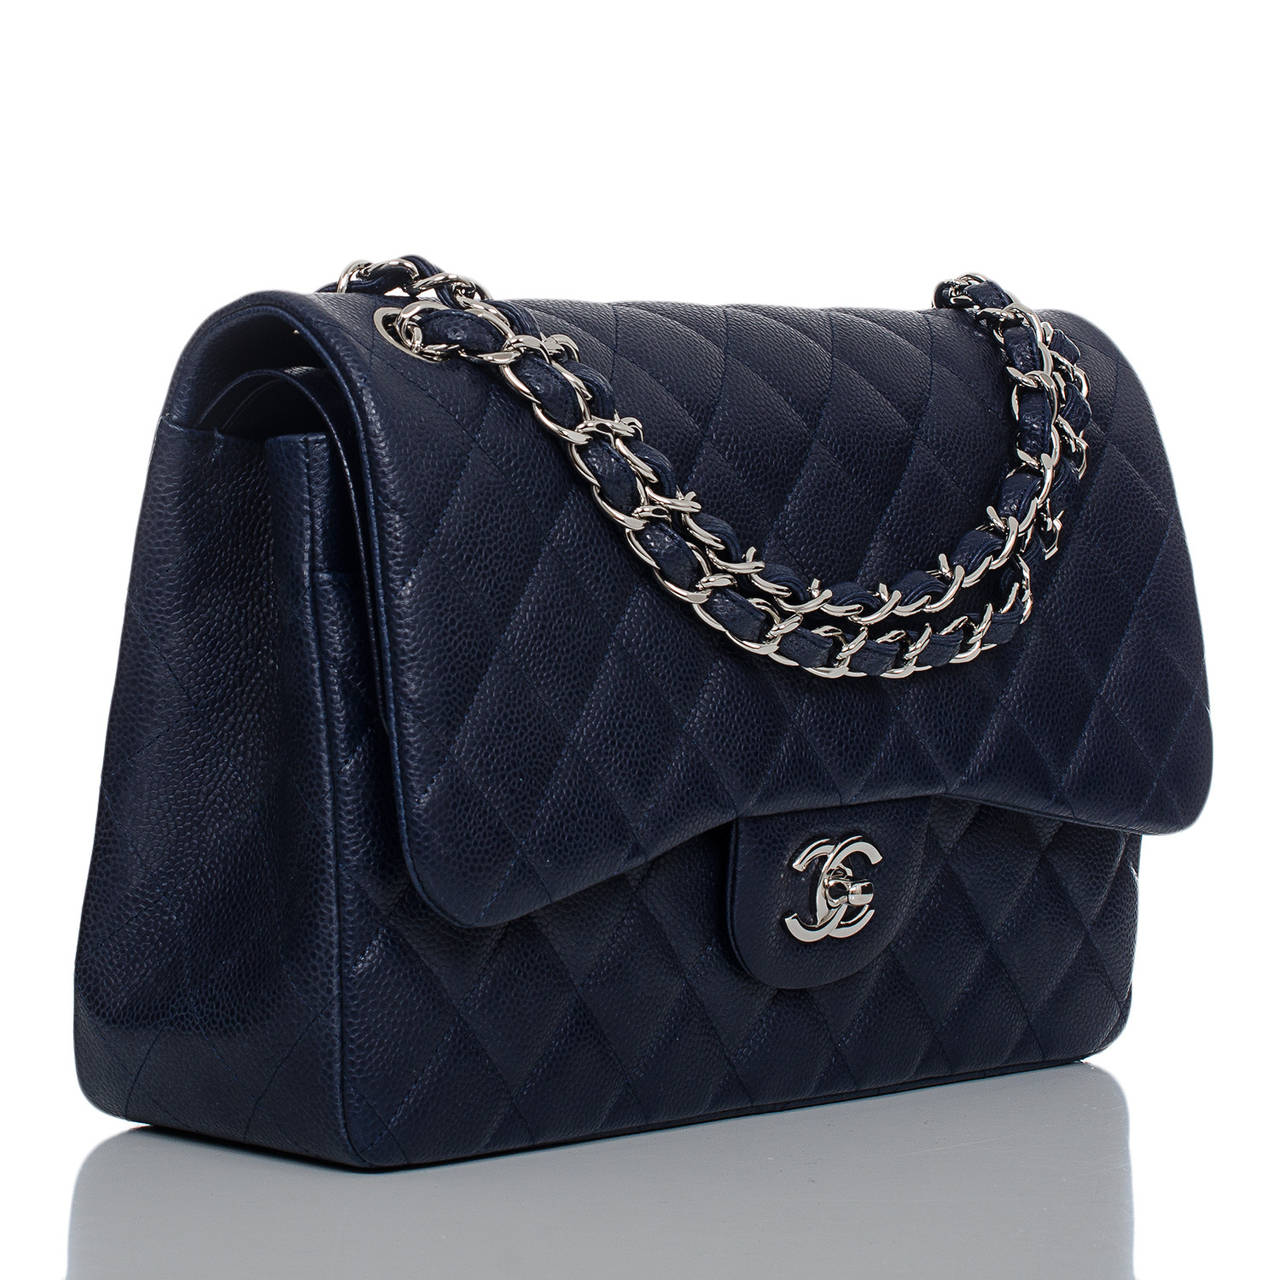 This Chanel Jumbo Classic double flap of navy caviar leather with silver tone hardware features a front flap with signature CC turnlock closure, half moon back pocket, and an adjustable interwoven silver tone chain link and navy leather shoulder